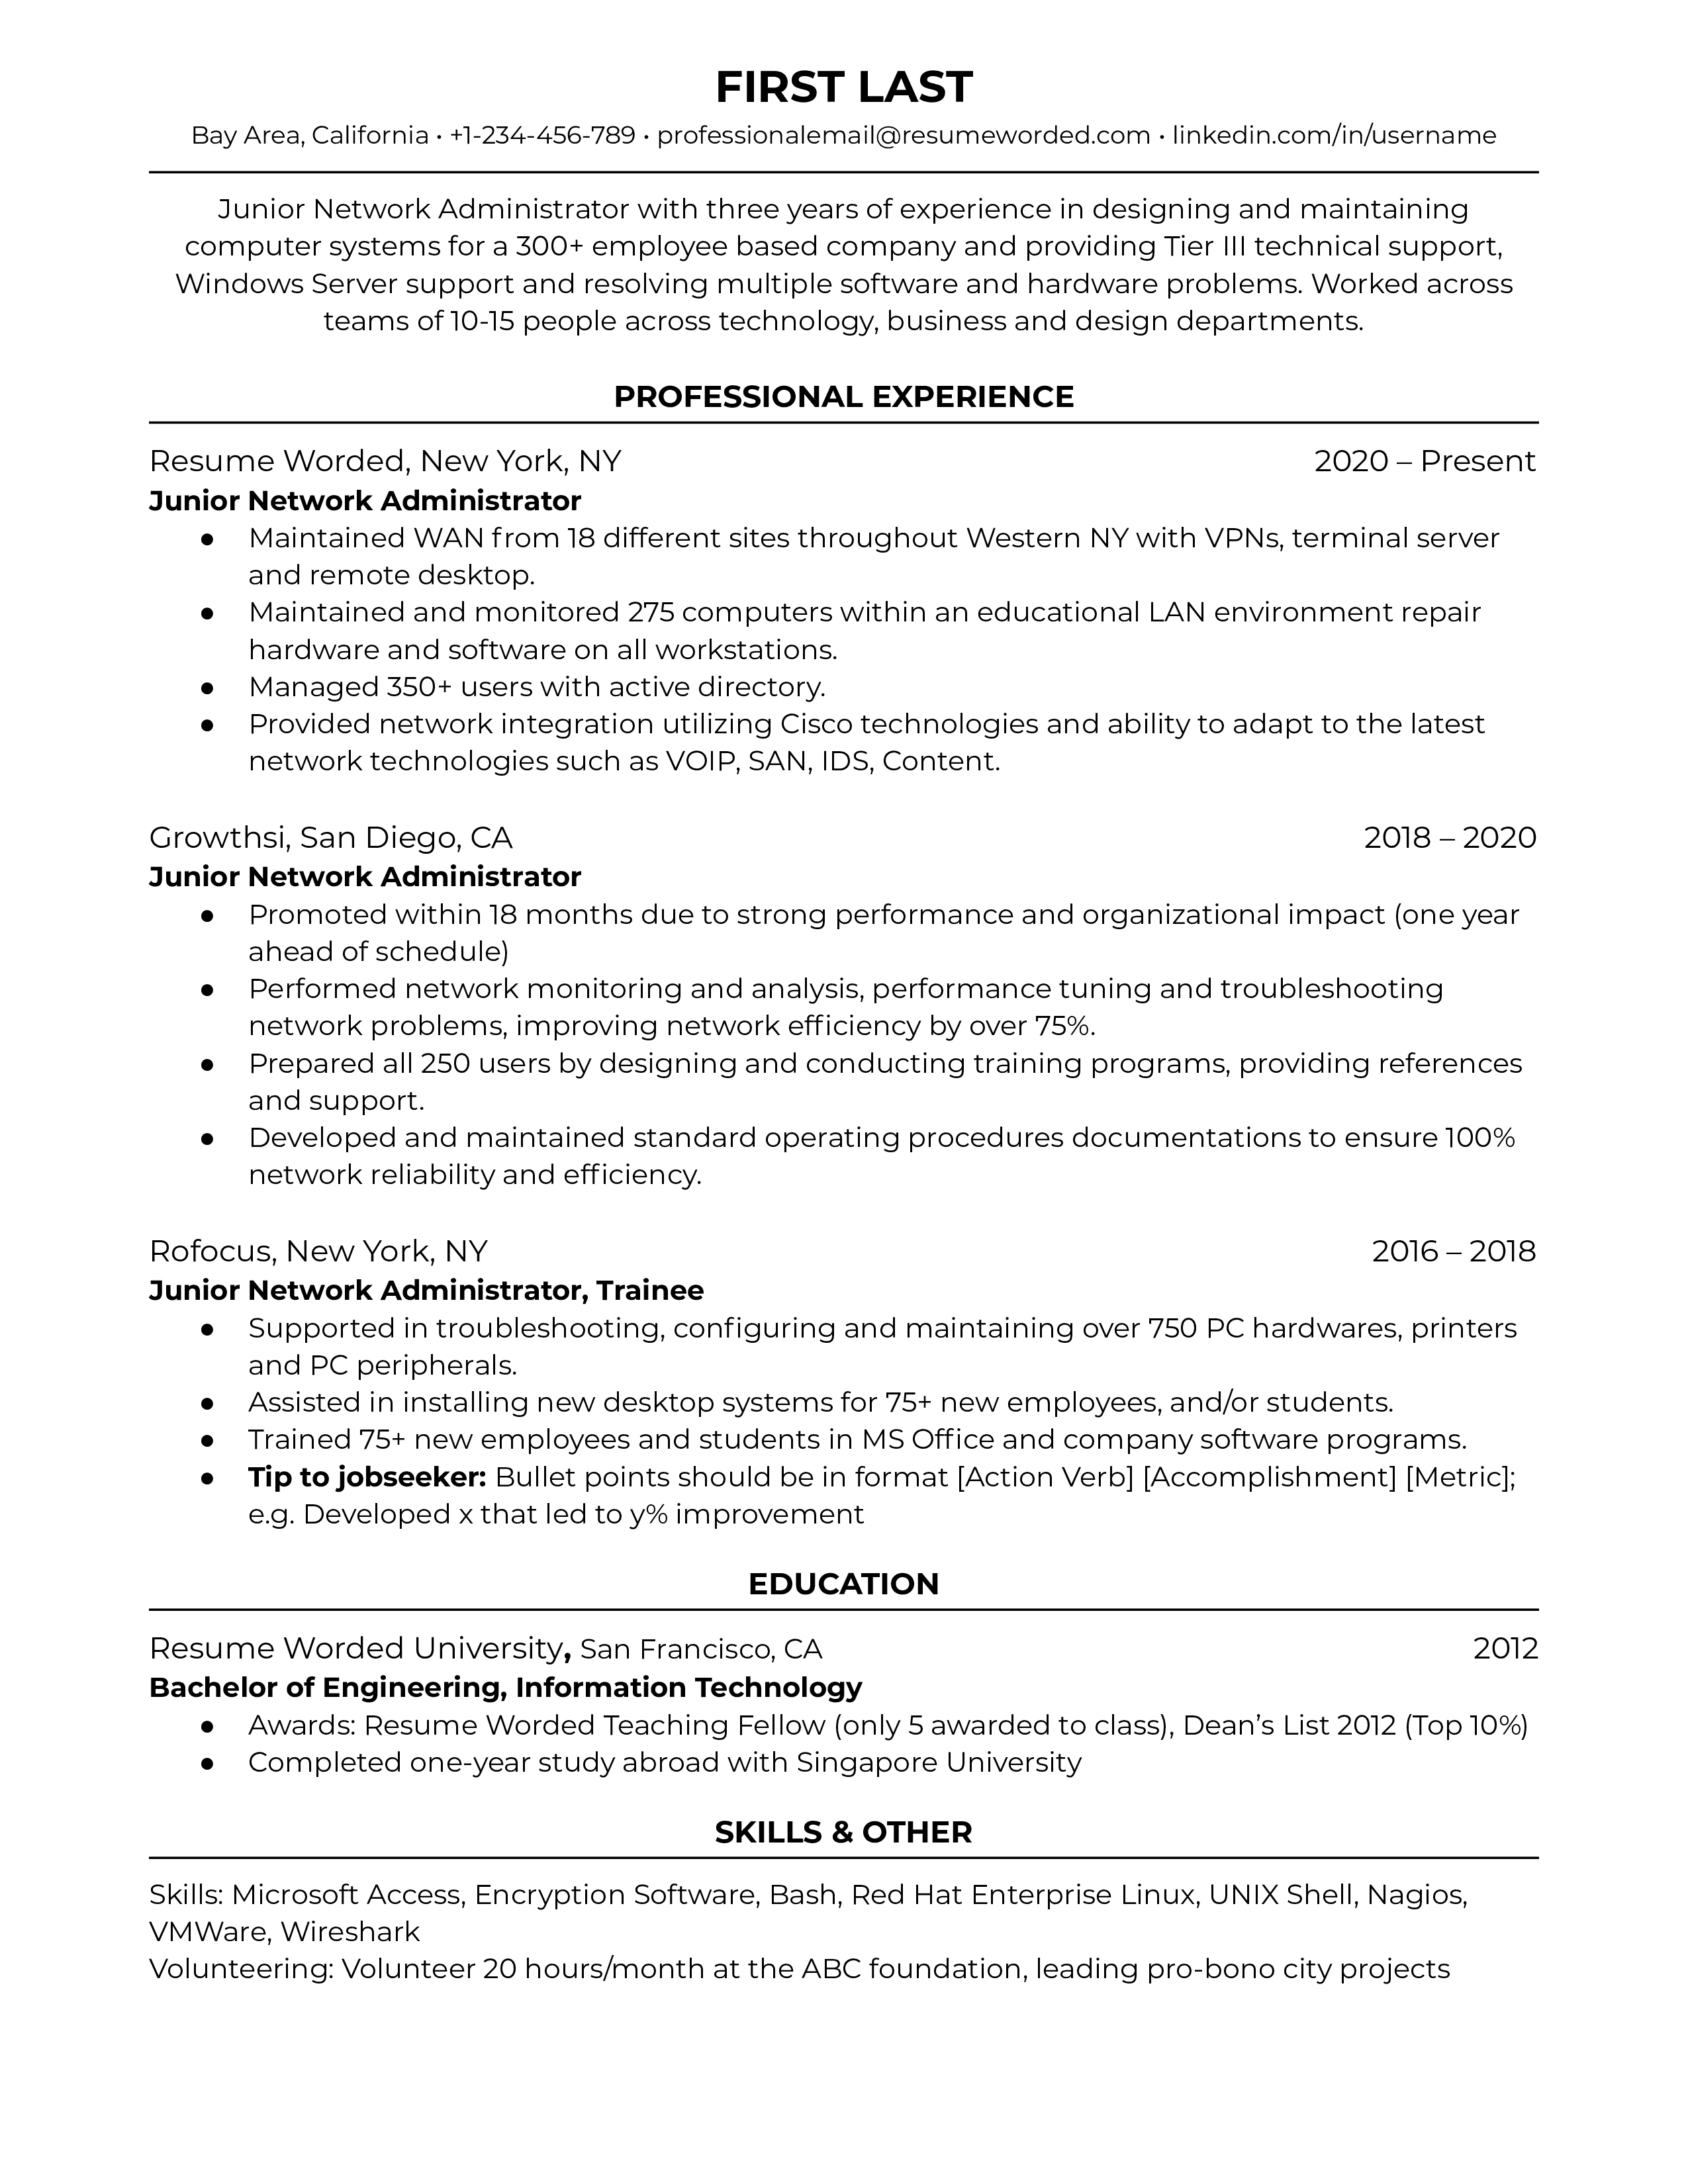 A Junior Network Administrator resume showcasing certifications and hands-on experience.